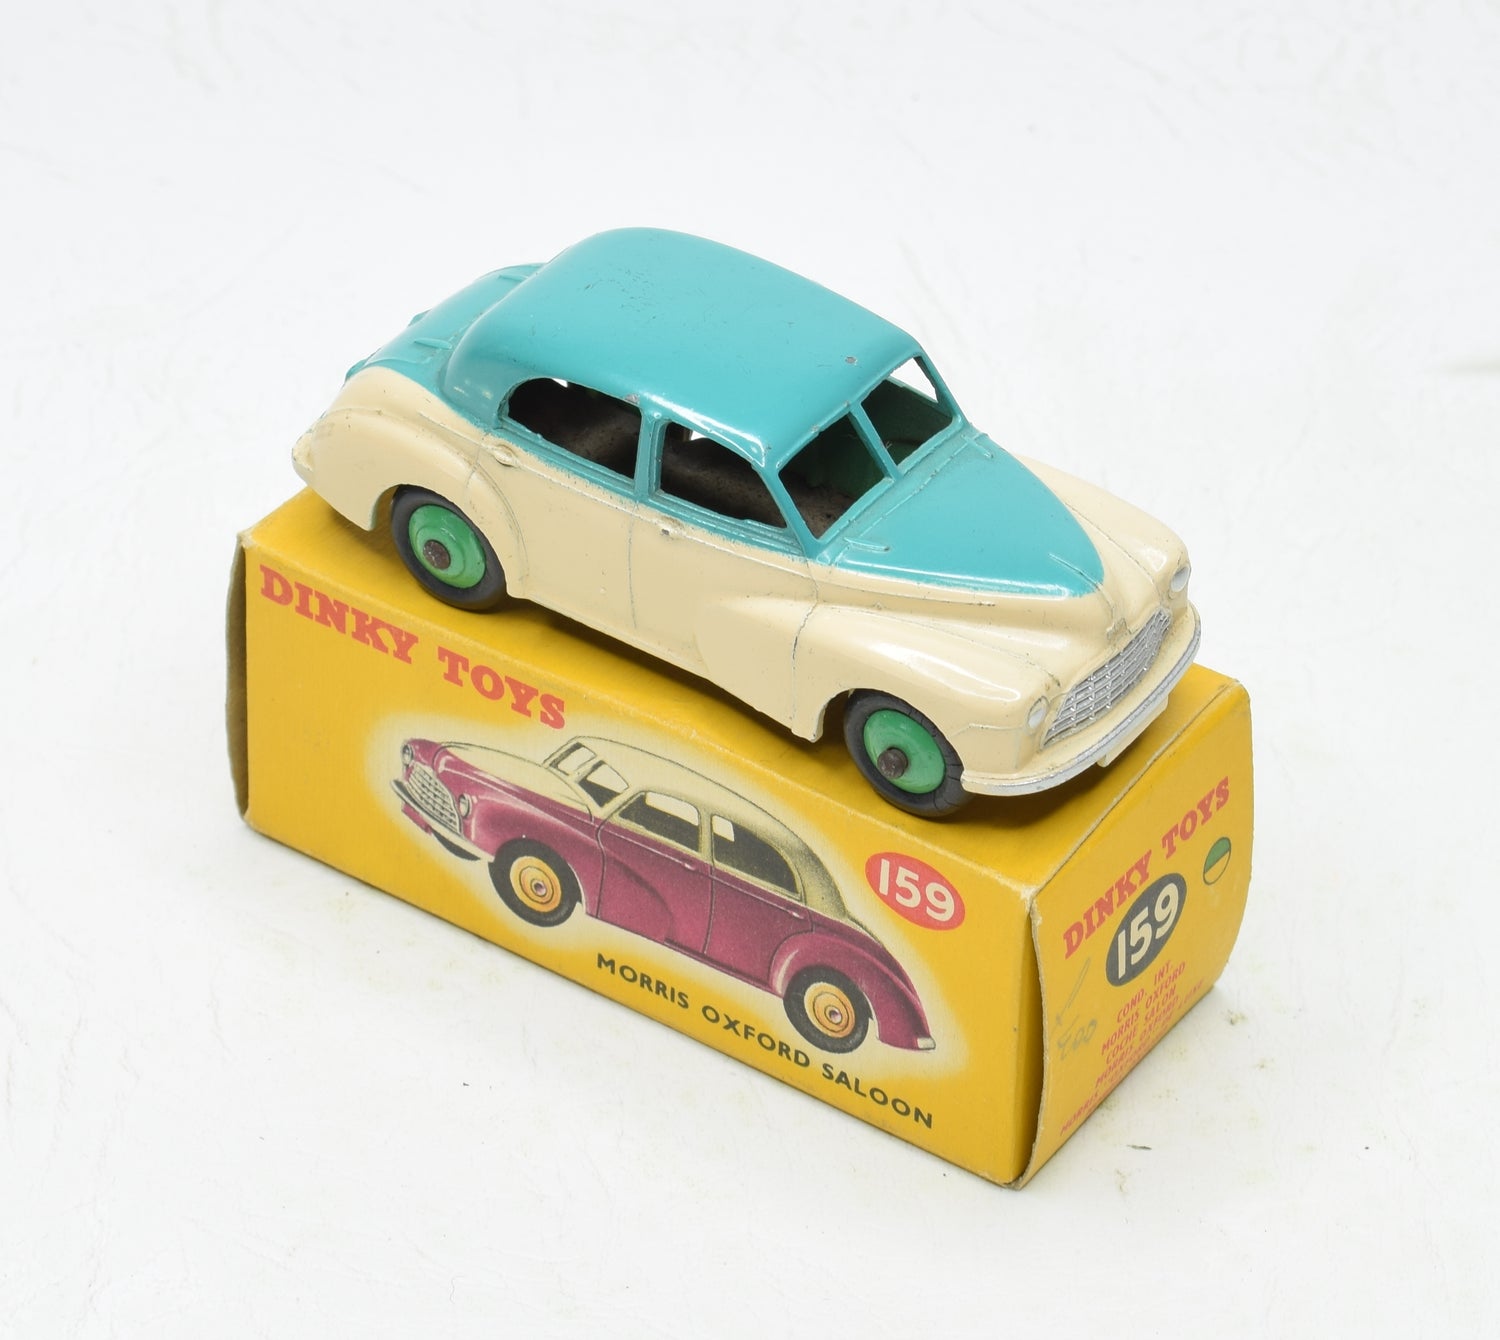 Dinky Toys 159 Morris Oxford Near Mint/Boxed ('Valencia' Collection) Turquoise & pink cream